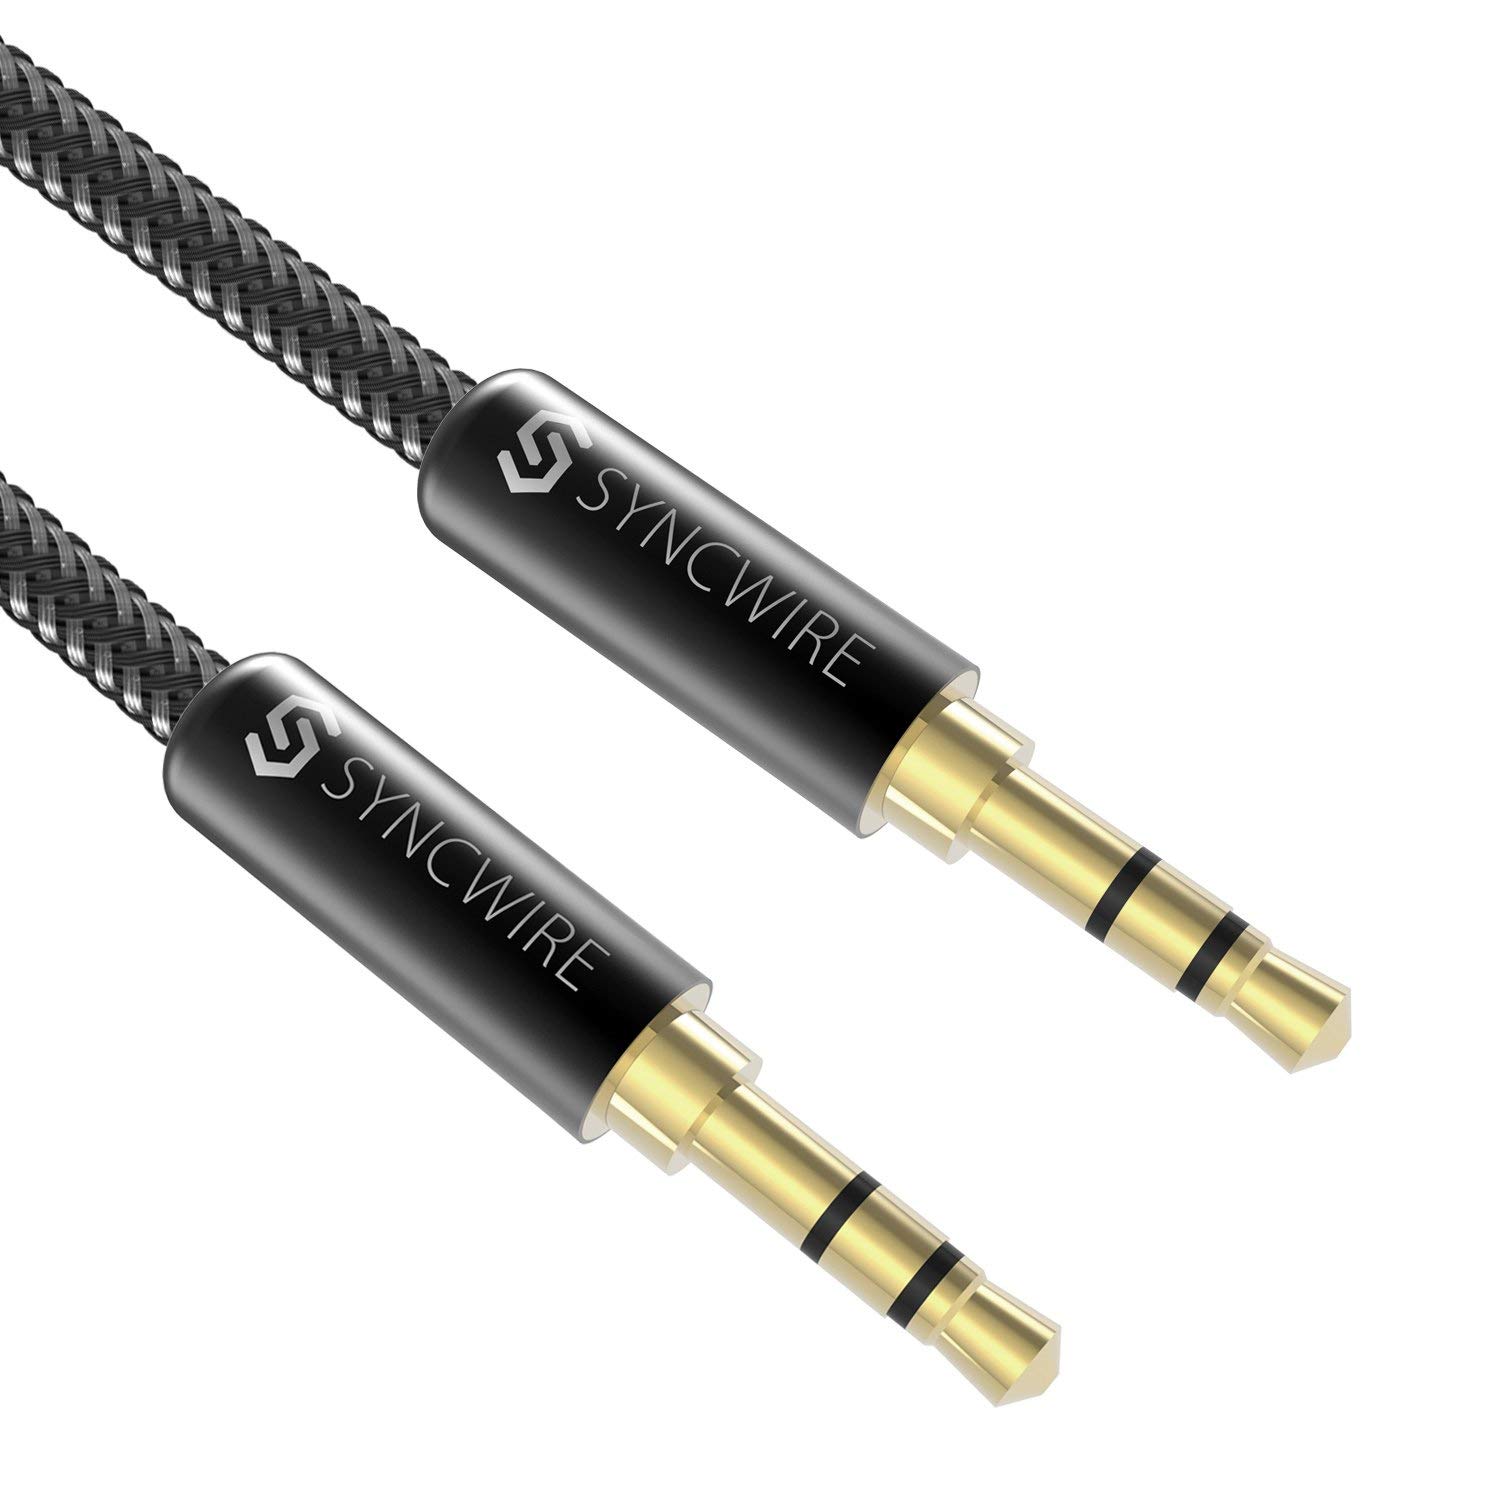 Syncwire 3.5mm Nylon Braided Aux Cable (3.3ft/1m,Hi-Fi Sound), Audio Auxiliary Input Adapter Male to Male AUX Cord for Headphones, Car, Home Stereos, Speaker, iPhone, iPad, iPod, Echo & More – Black